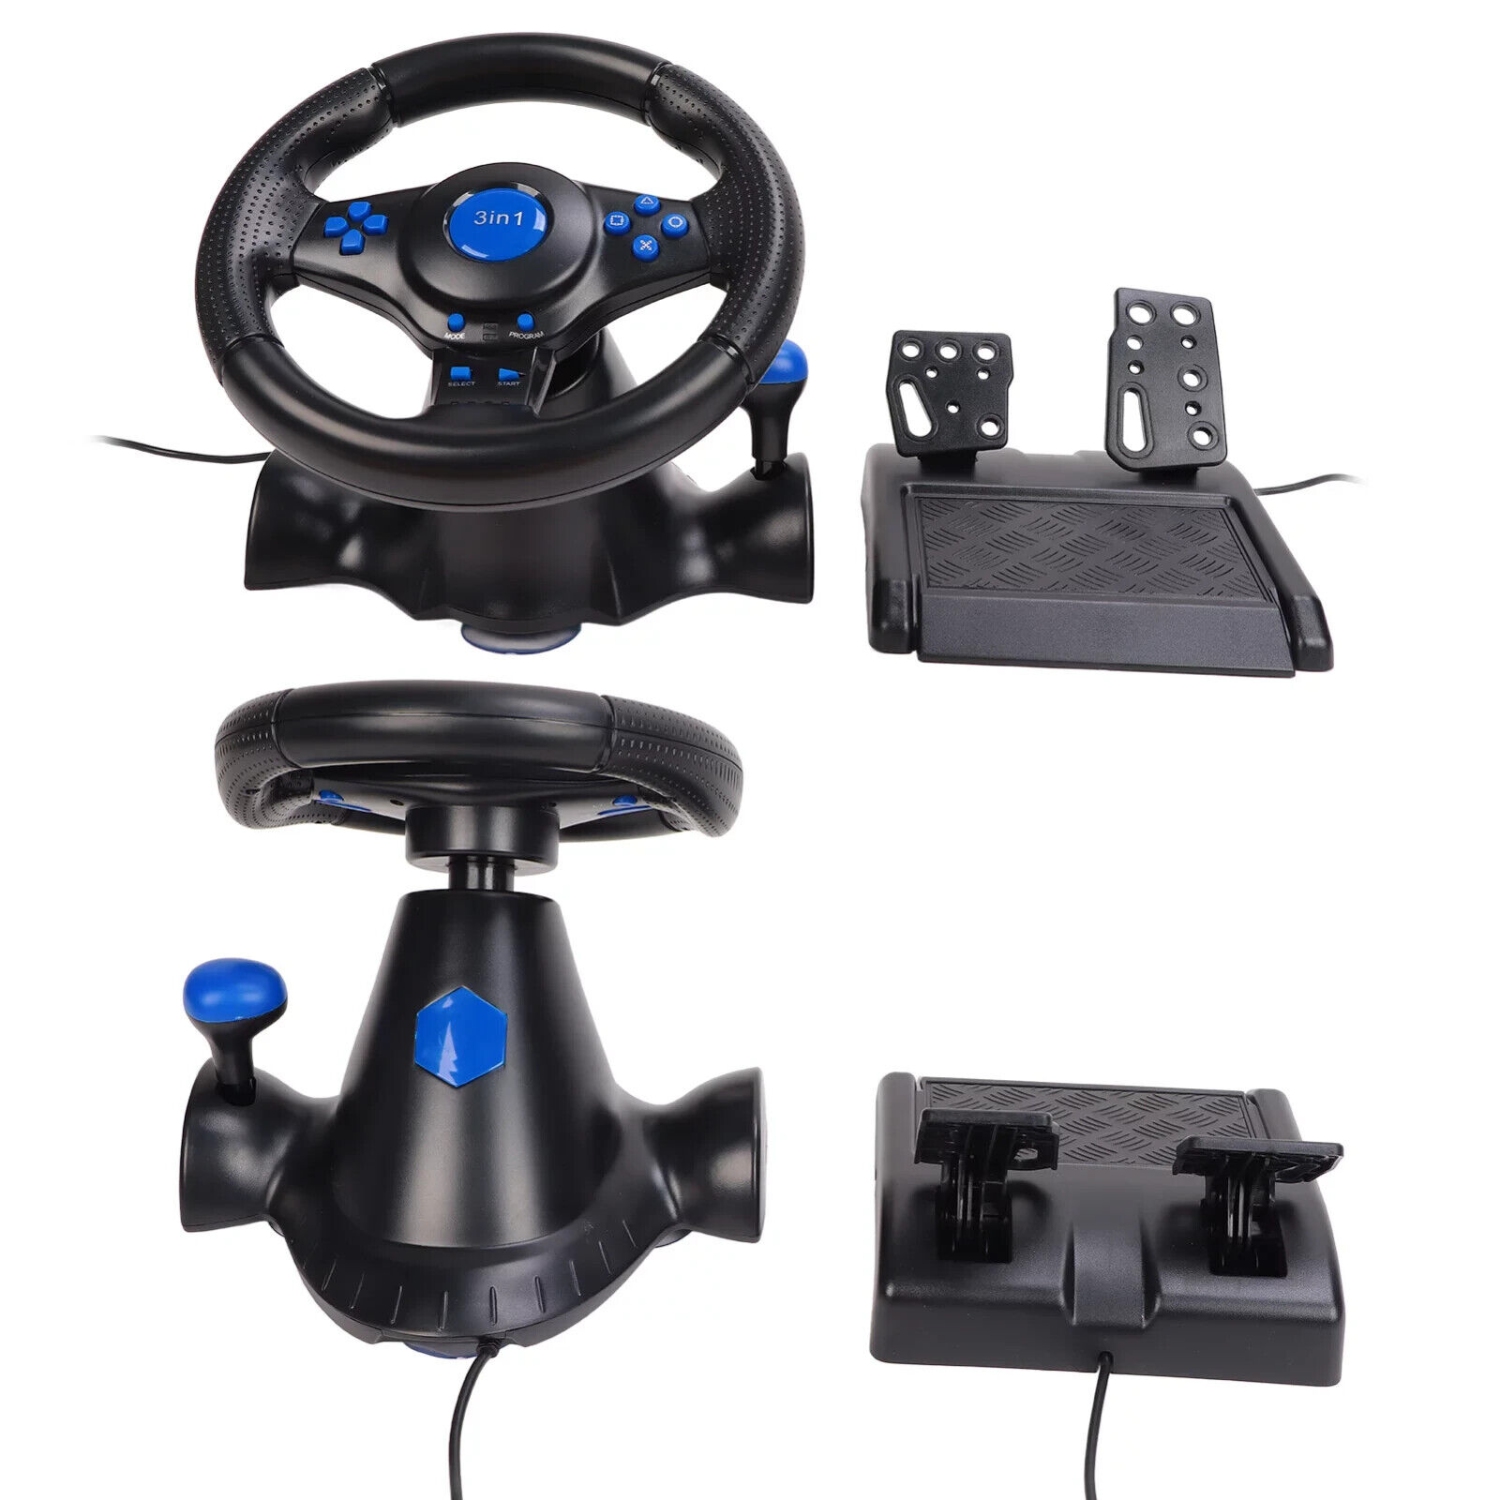 GT-V7 Gaming Steering Wheel( PS4, PS4 Slim, PS4 Pro, PS3, Xbox one, Nintendo Switch, PC)